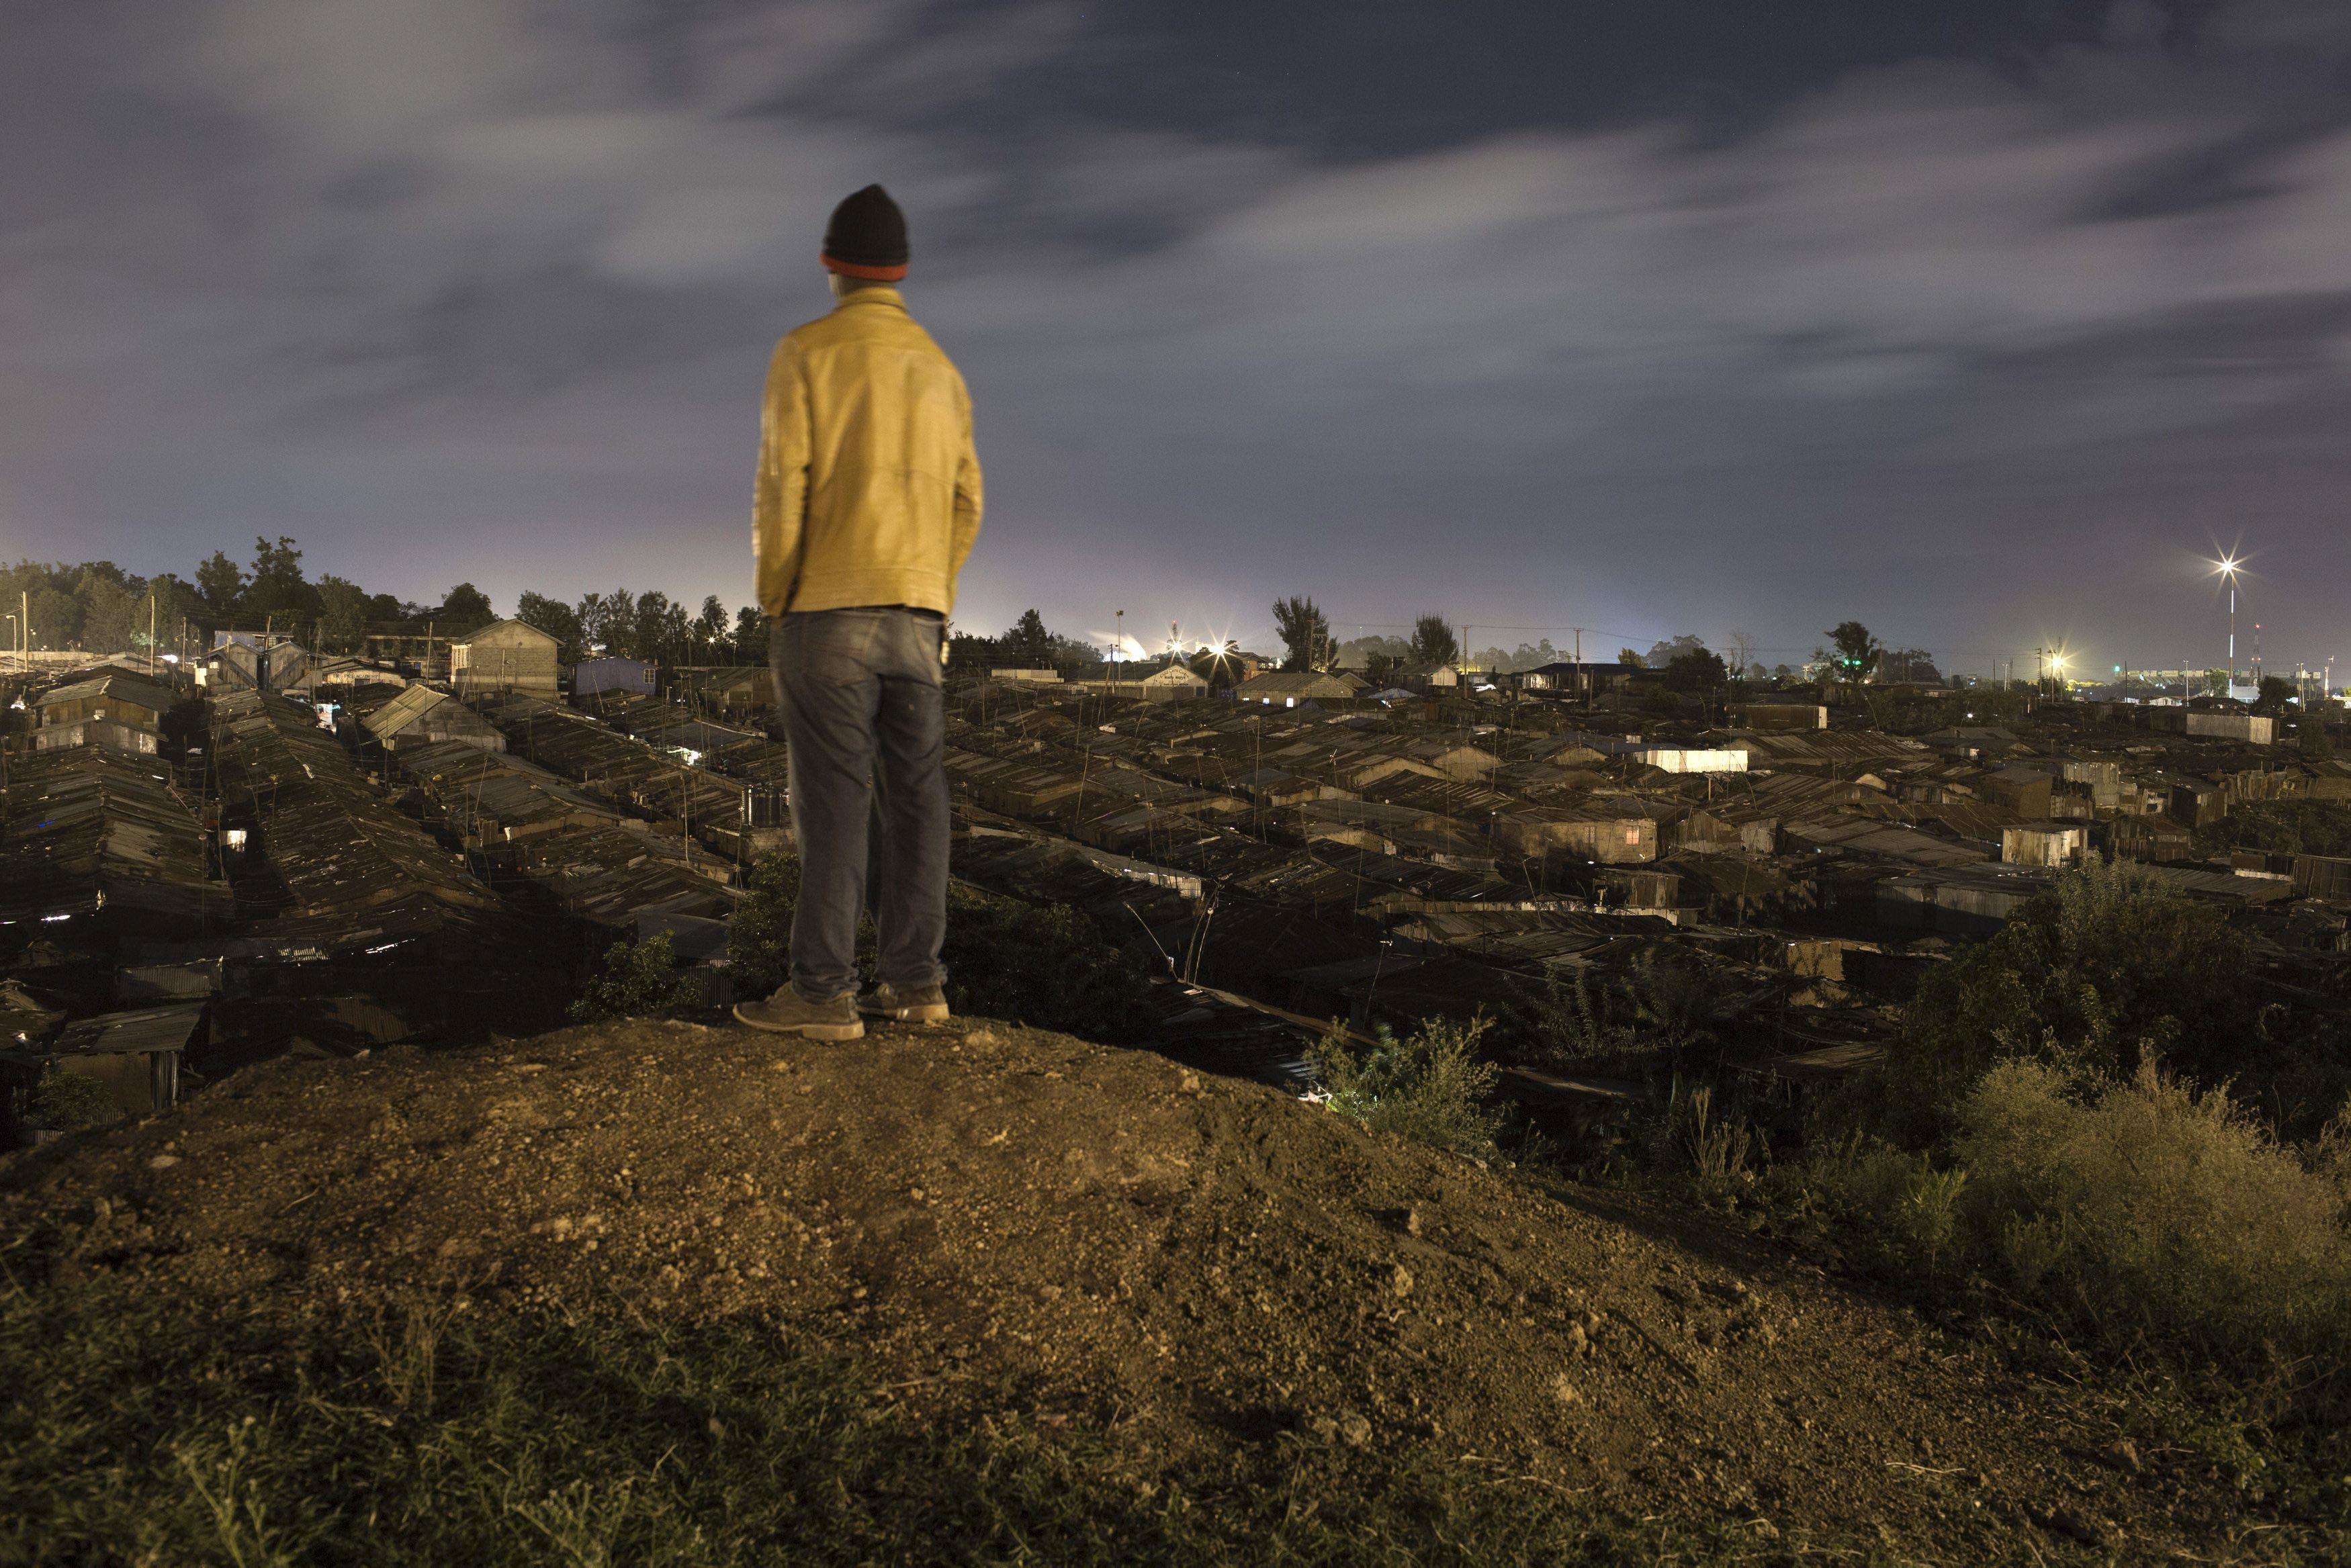 A man stands on a hilltop overlooking Korogocho in Nairobi